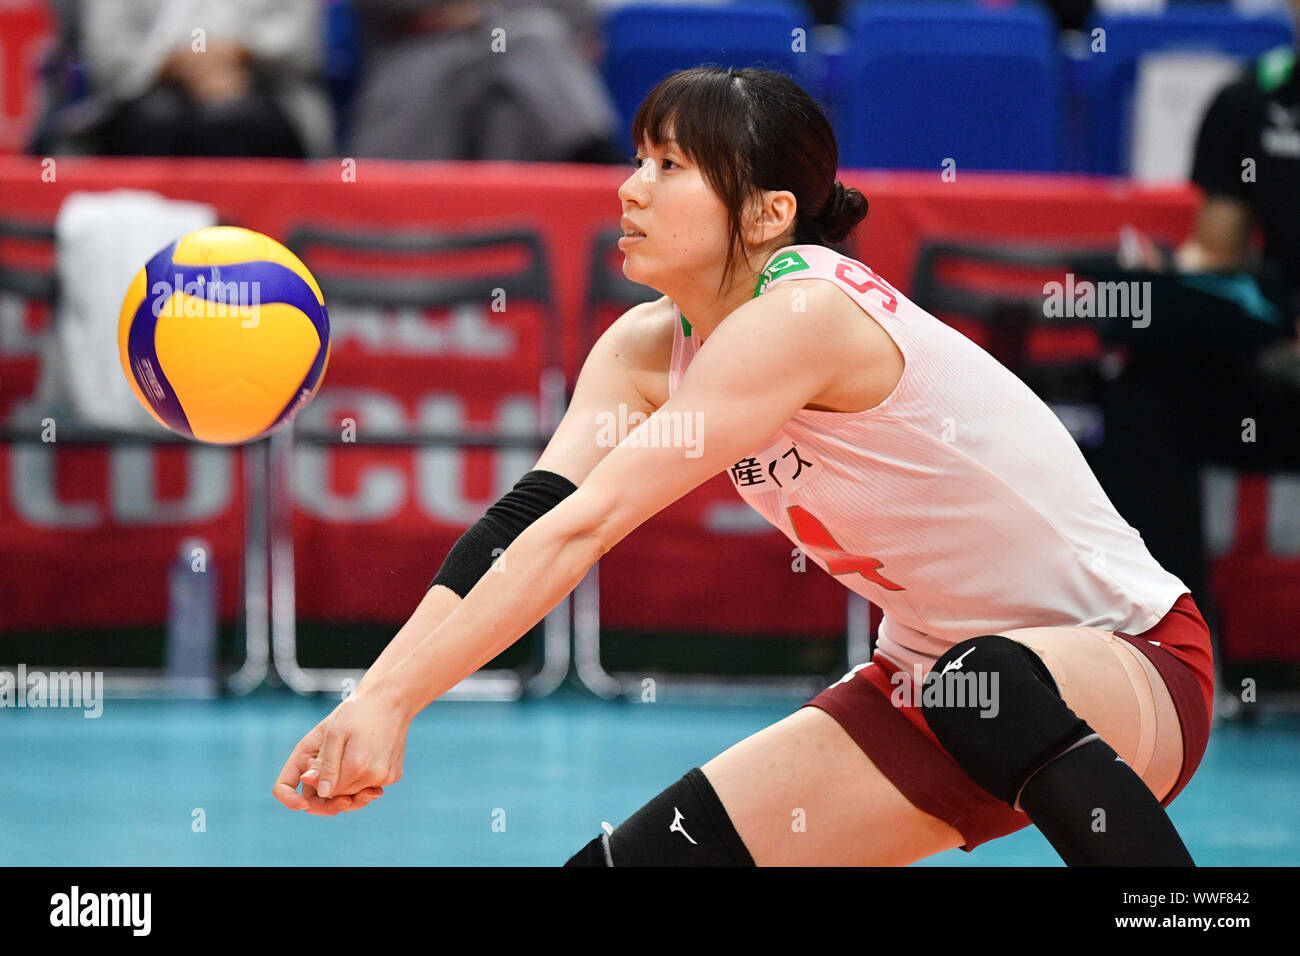 Kanagawa, Japan. Credit: MATSUO. 15th Sep, 2019. Risa Shinnabe (JPN) Volleyball : 2019 FIVB Volleyball Women's World Cup First Round match between Russia 3-2 Japan at Yokohama Arena in Kanagawa, Japan. Credit: MATSUO .K/AFLO SPORT/Alamy Live News Stock Photo